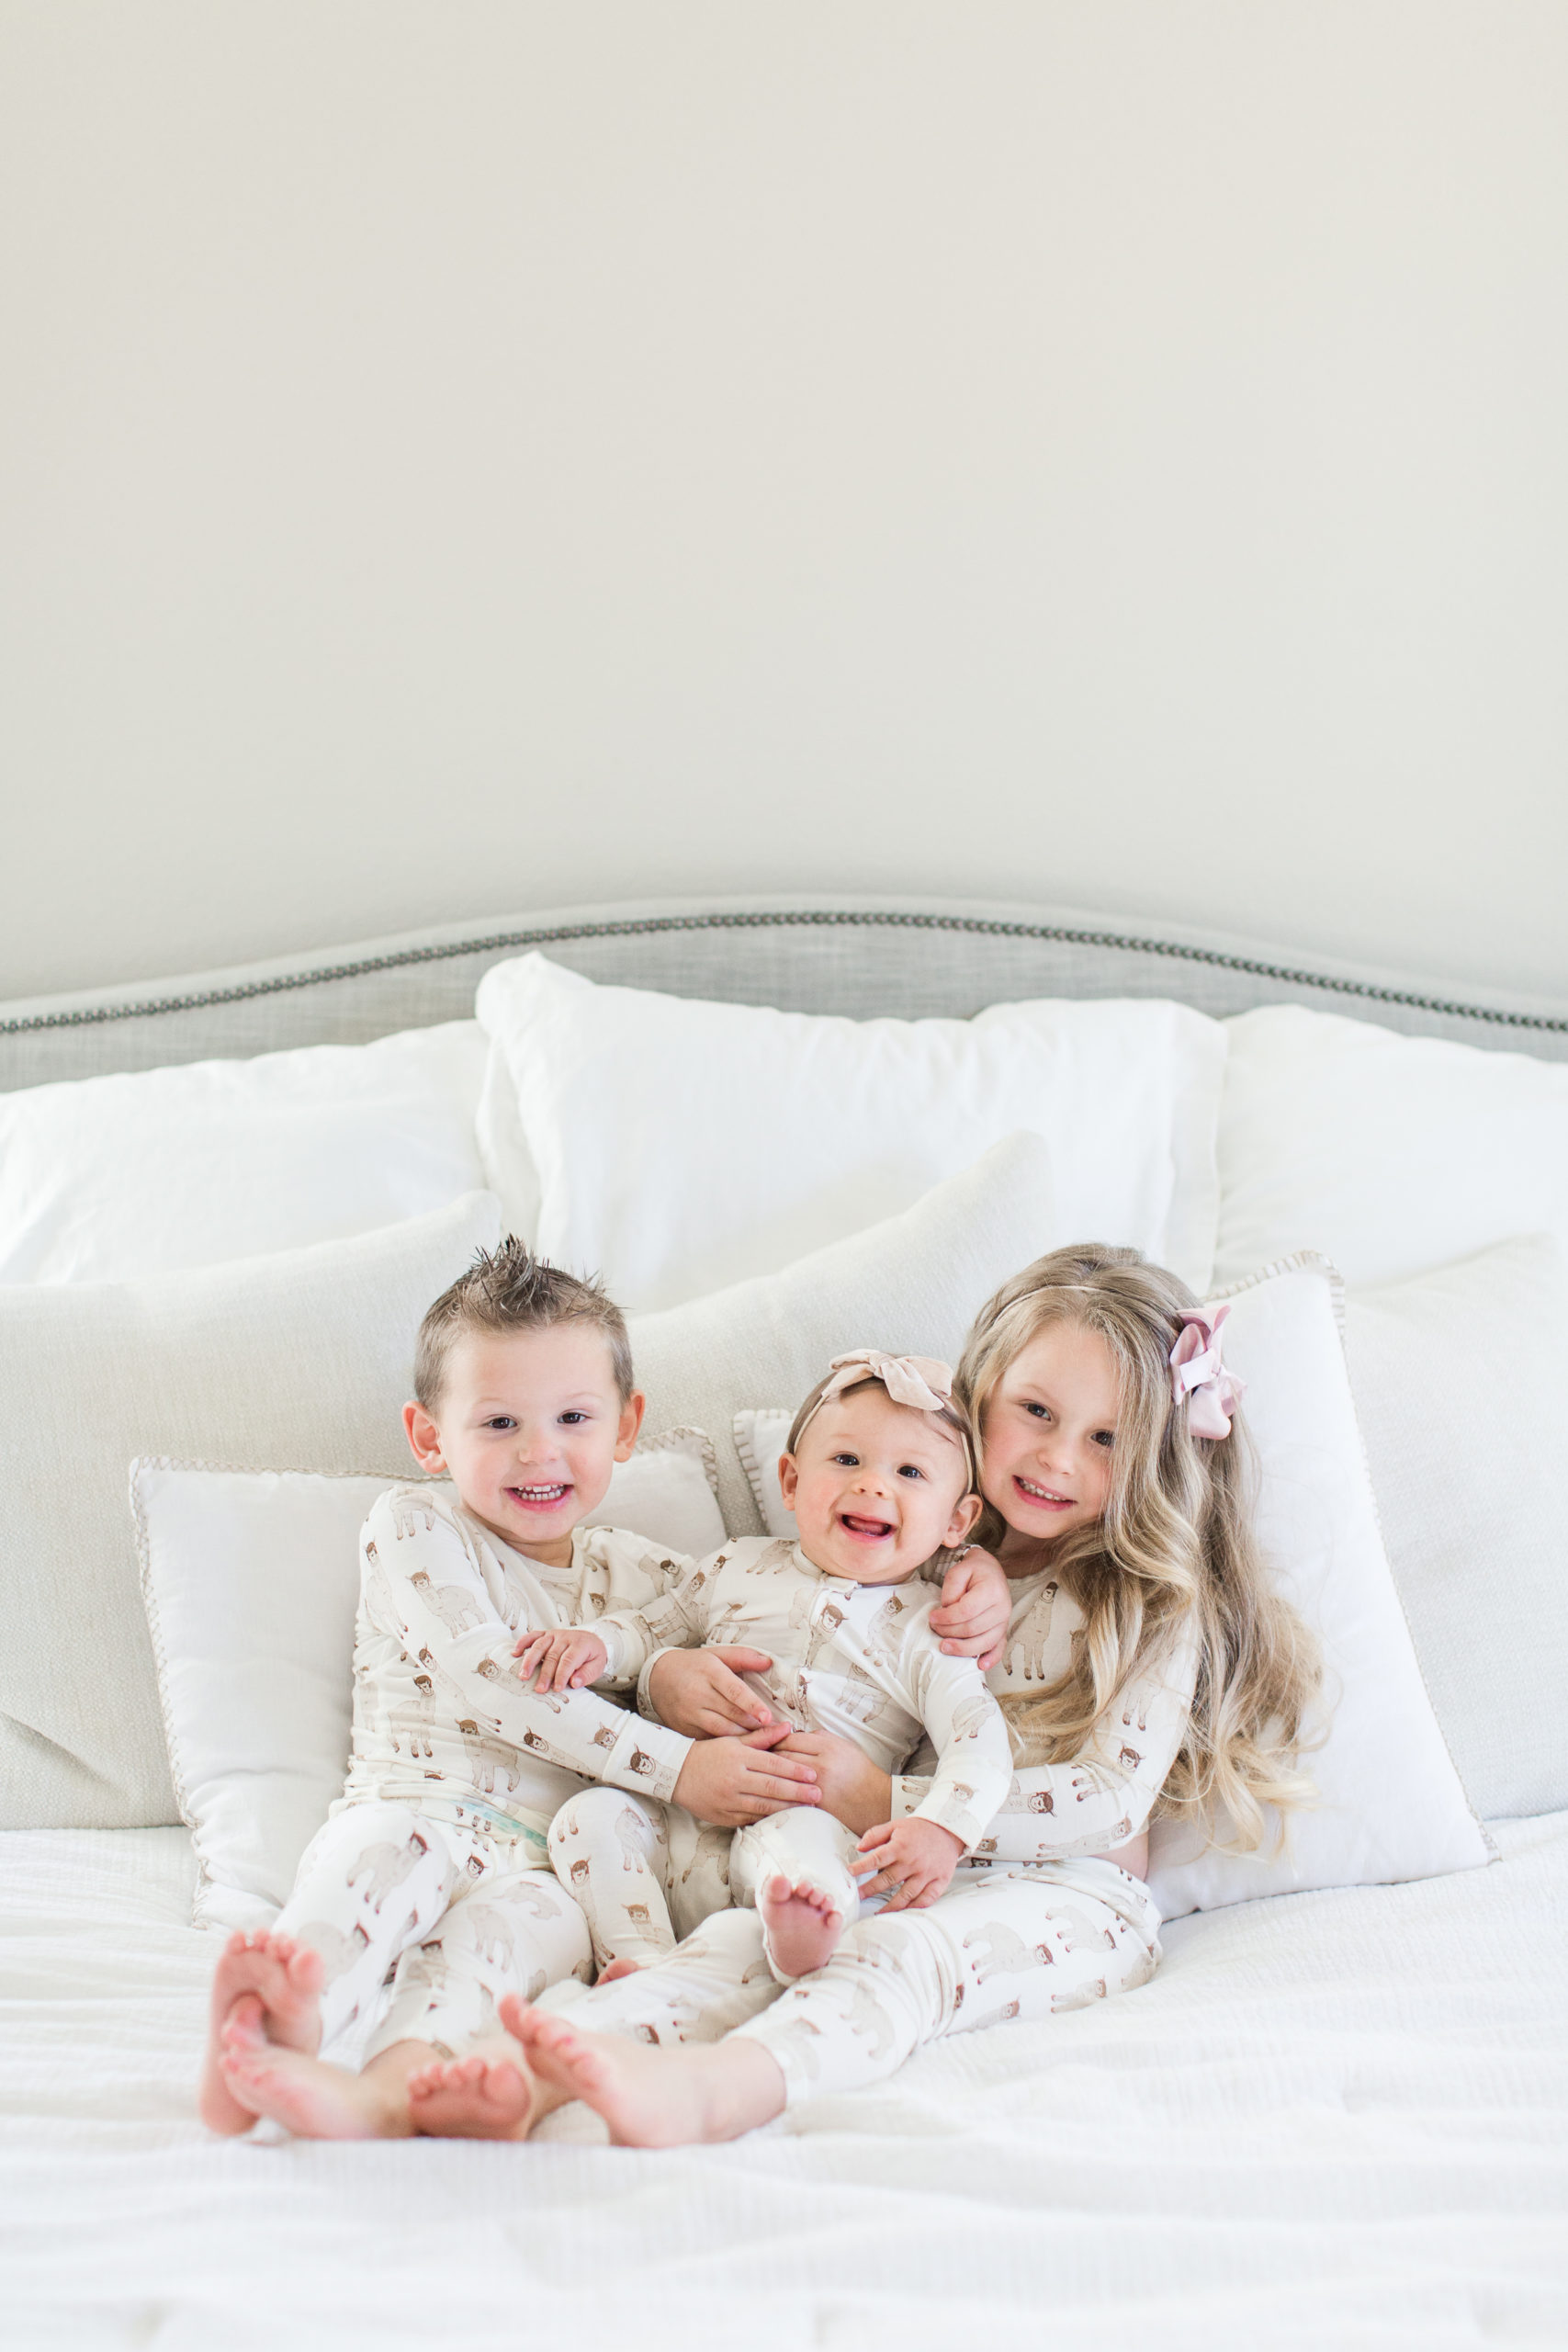 Neutral Pajamas in Lifestyle Session with Siblings on Master Bed | Angela + Kids